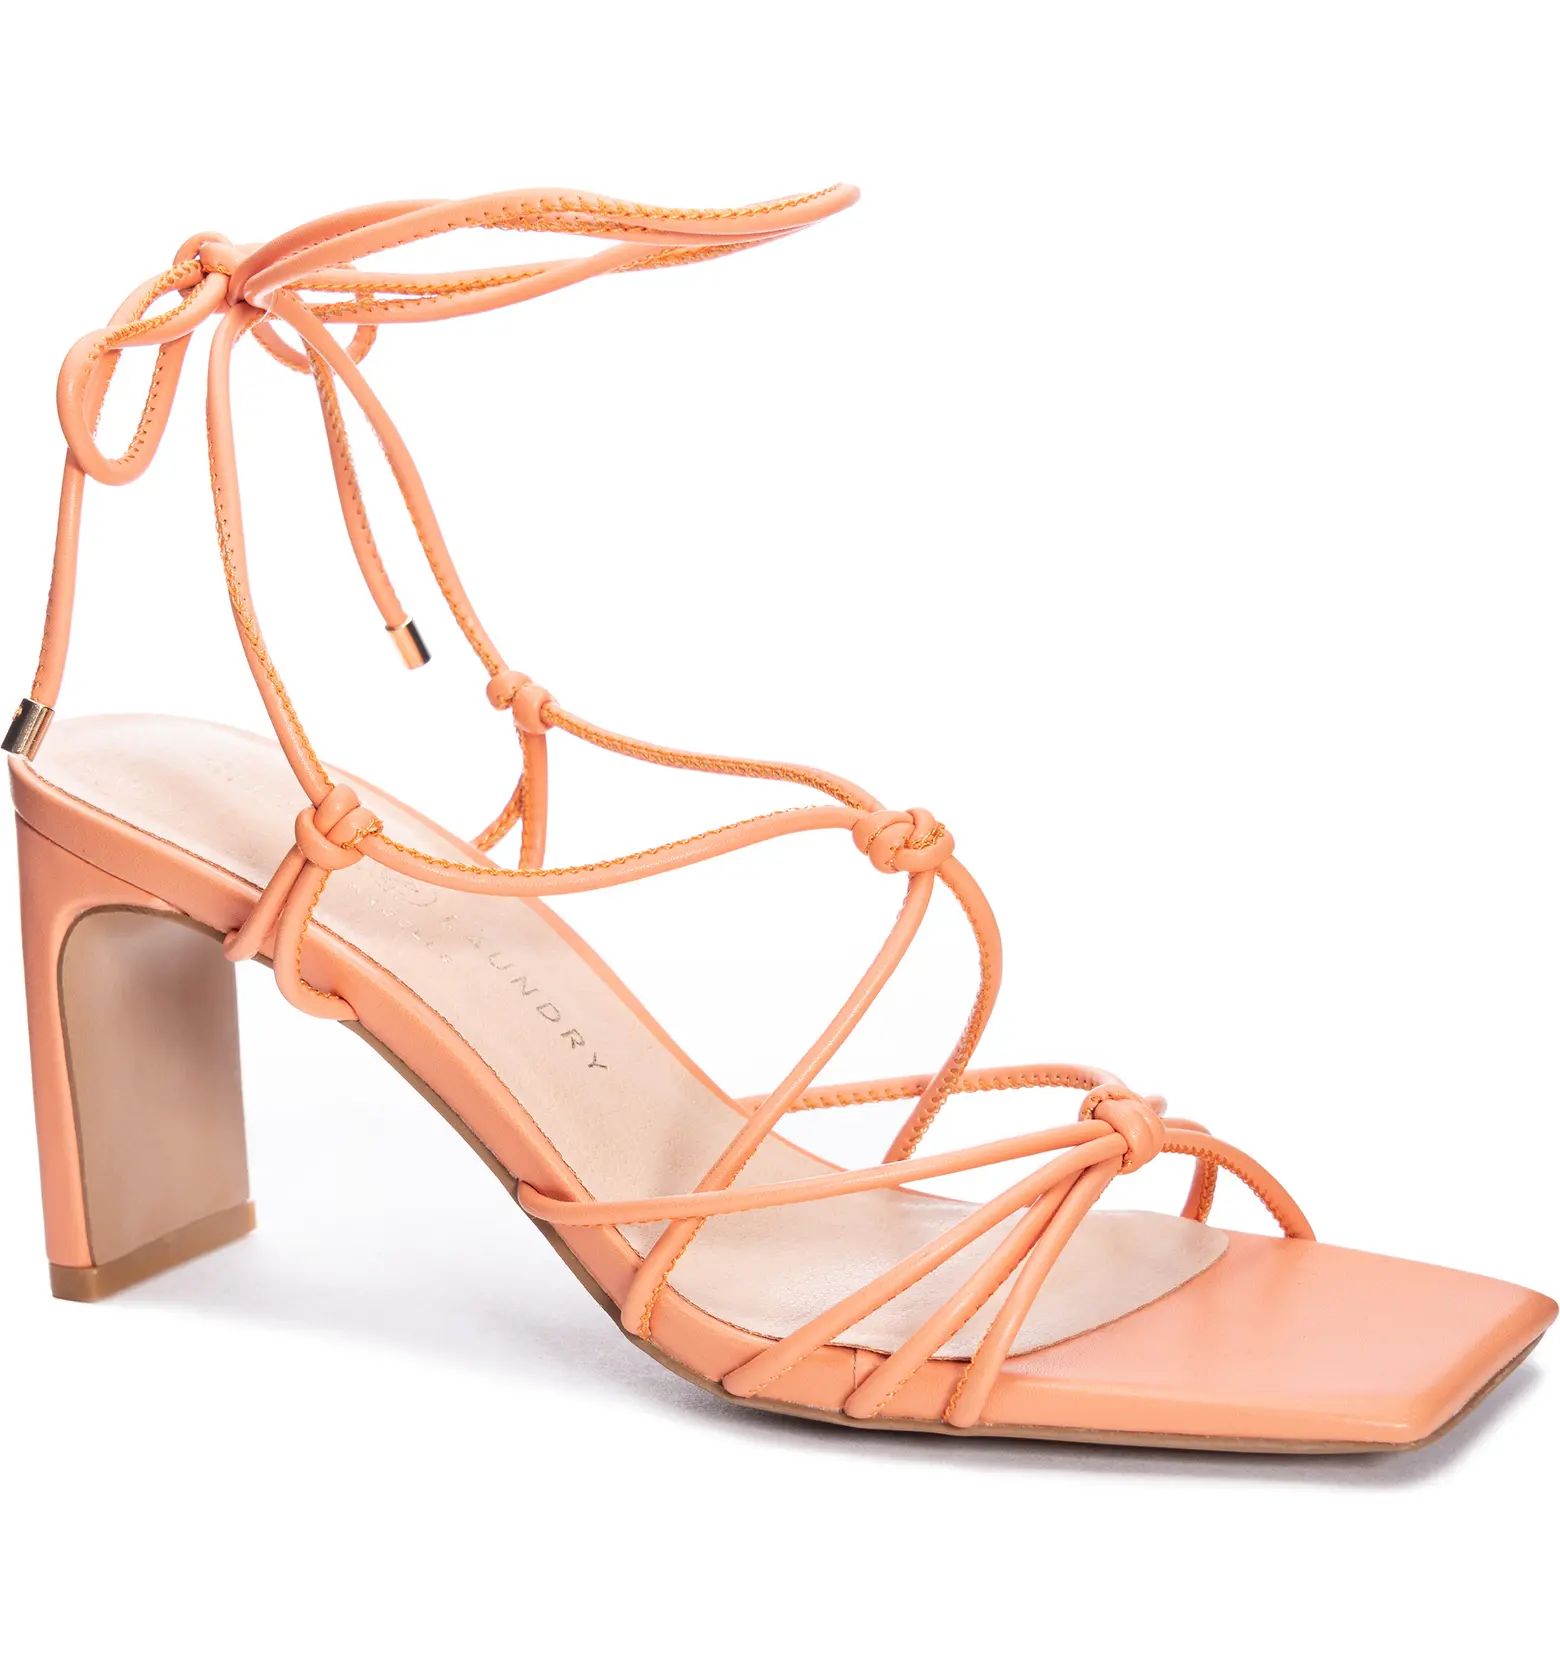 Yita Smooth Ankle Tie Sandal | Nordstrom